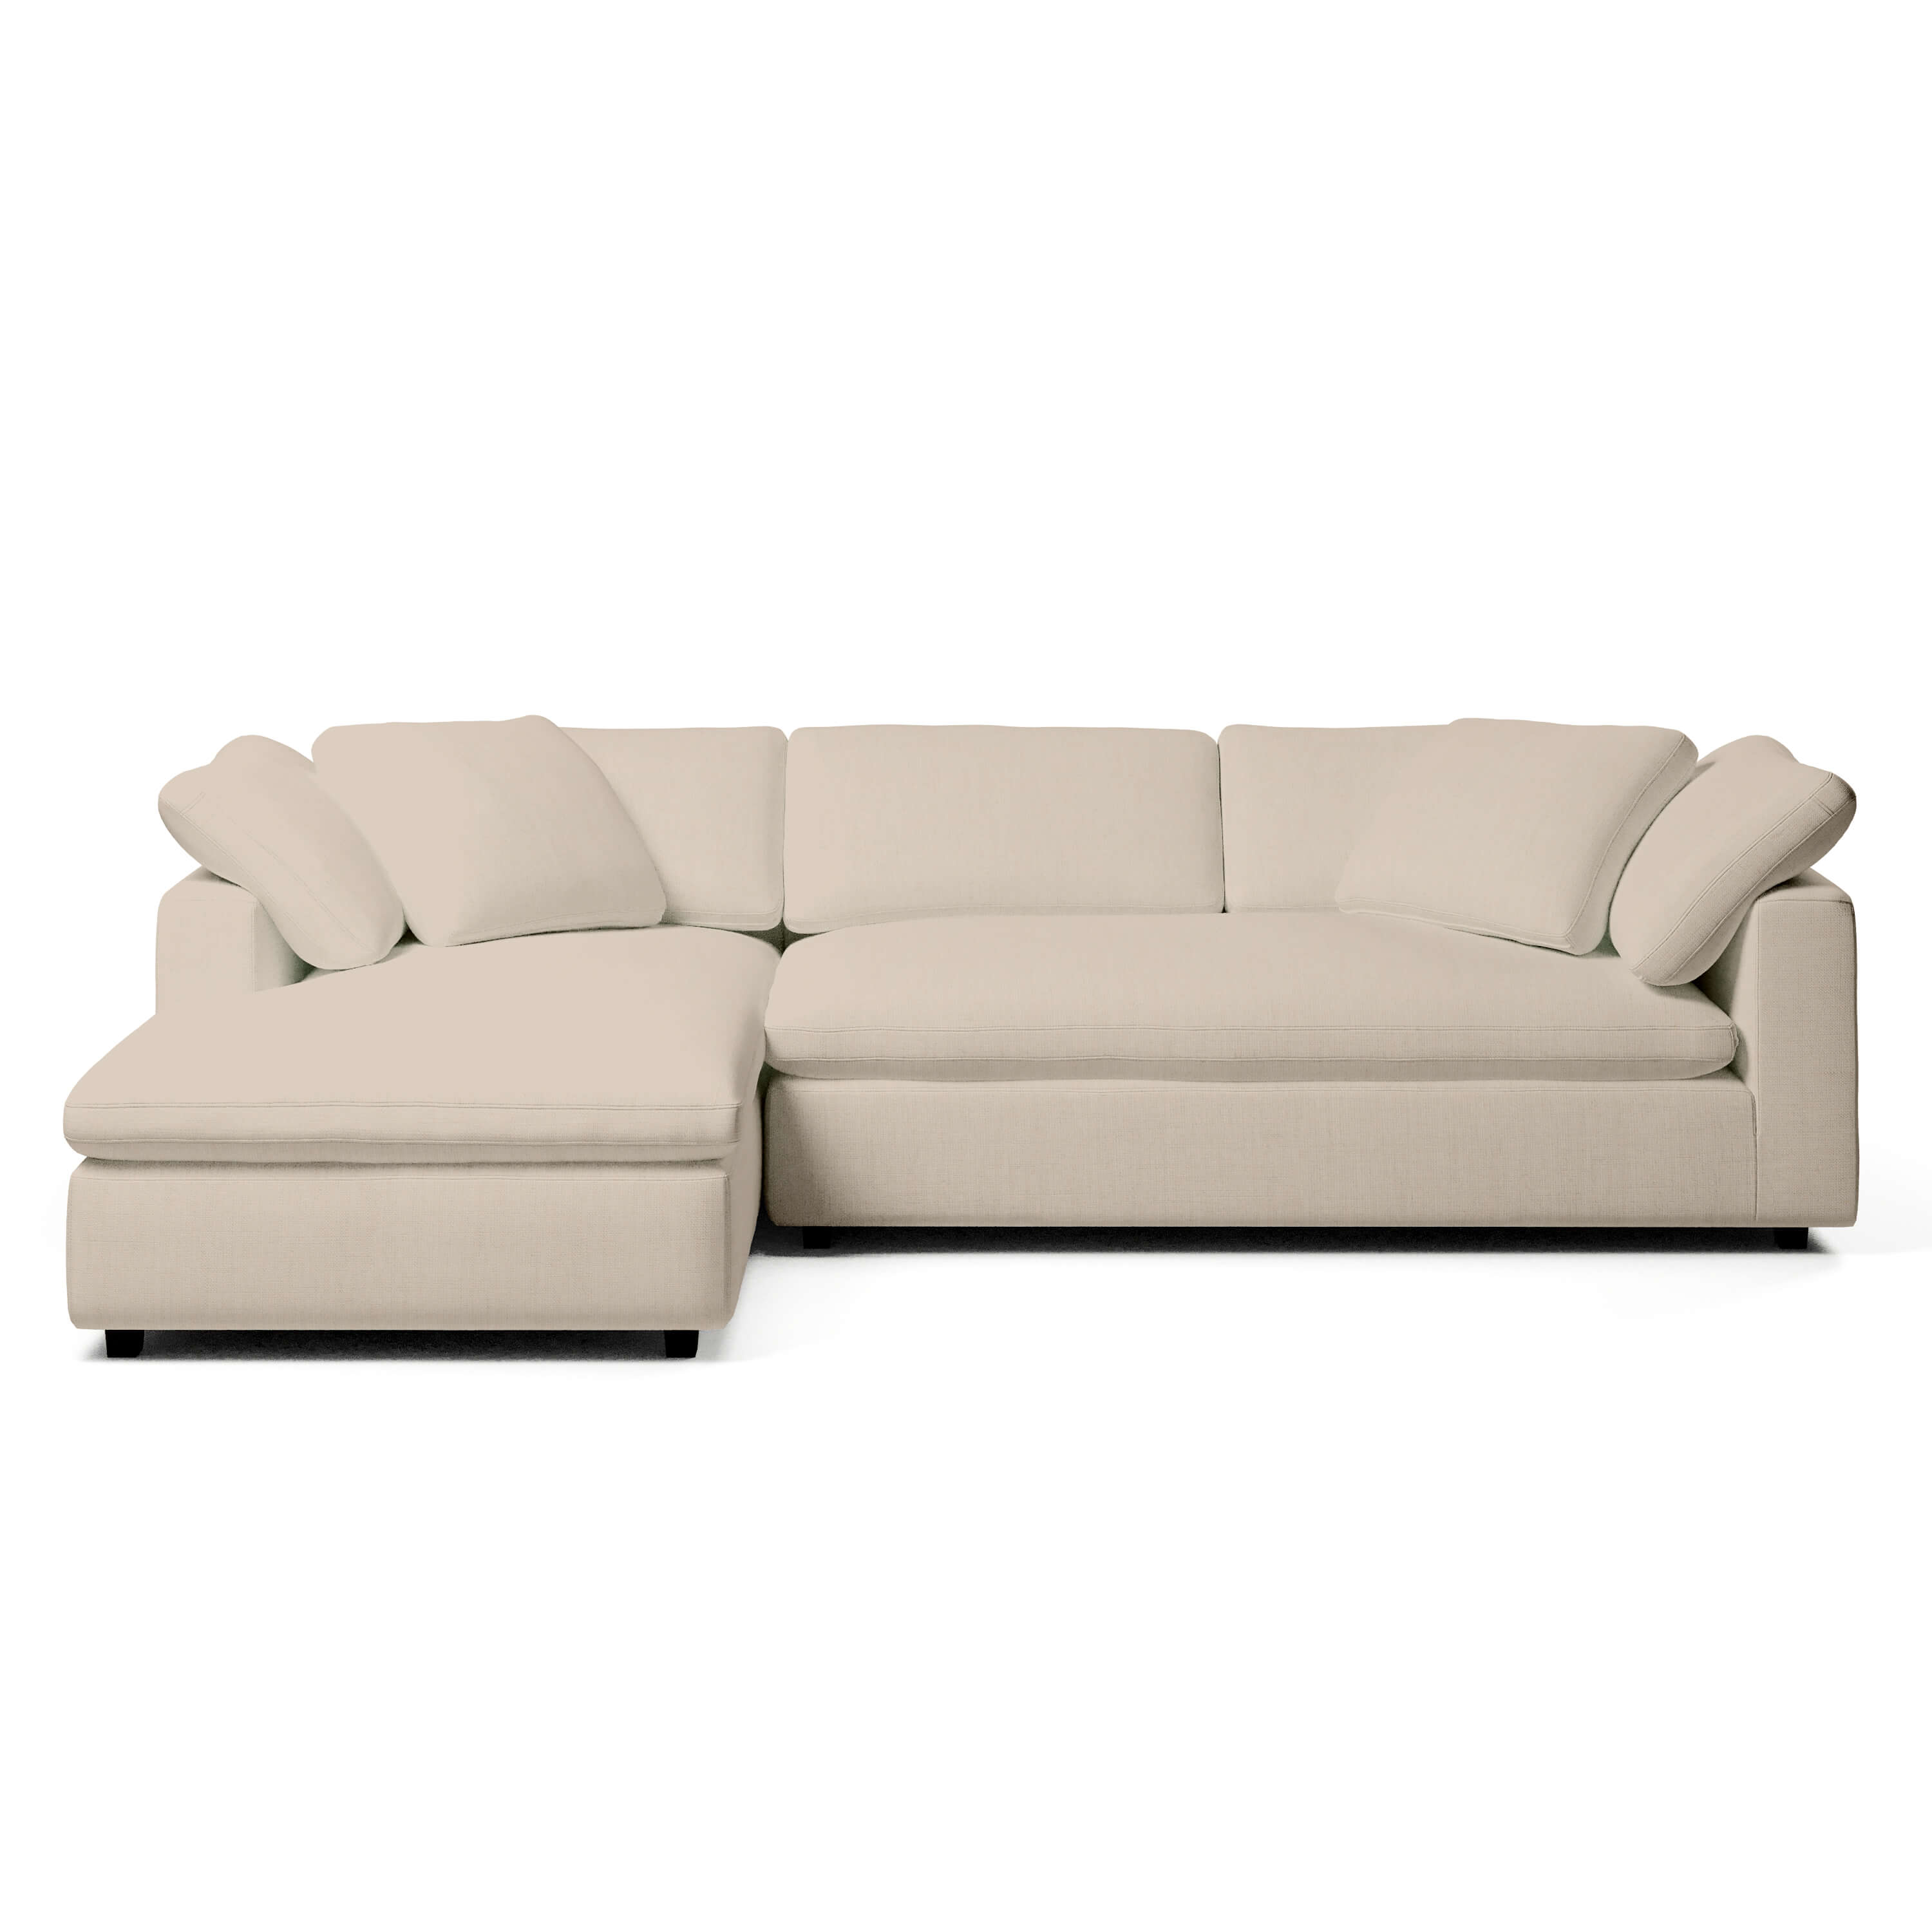 Comfy Modular Sofa - 3-Seater Left-Arm Chaise Bench-Seat